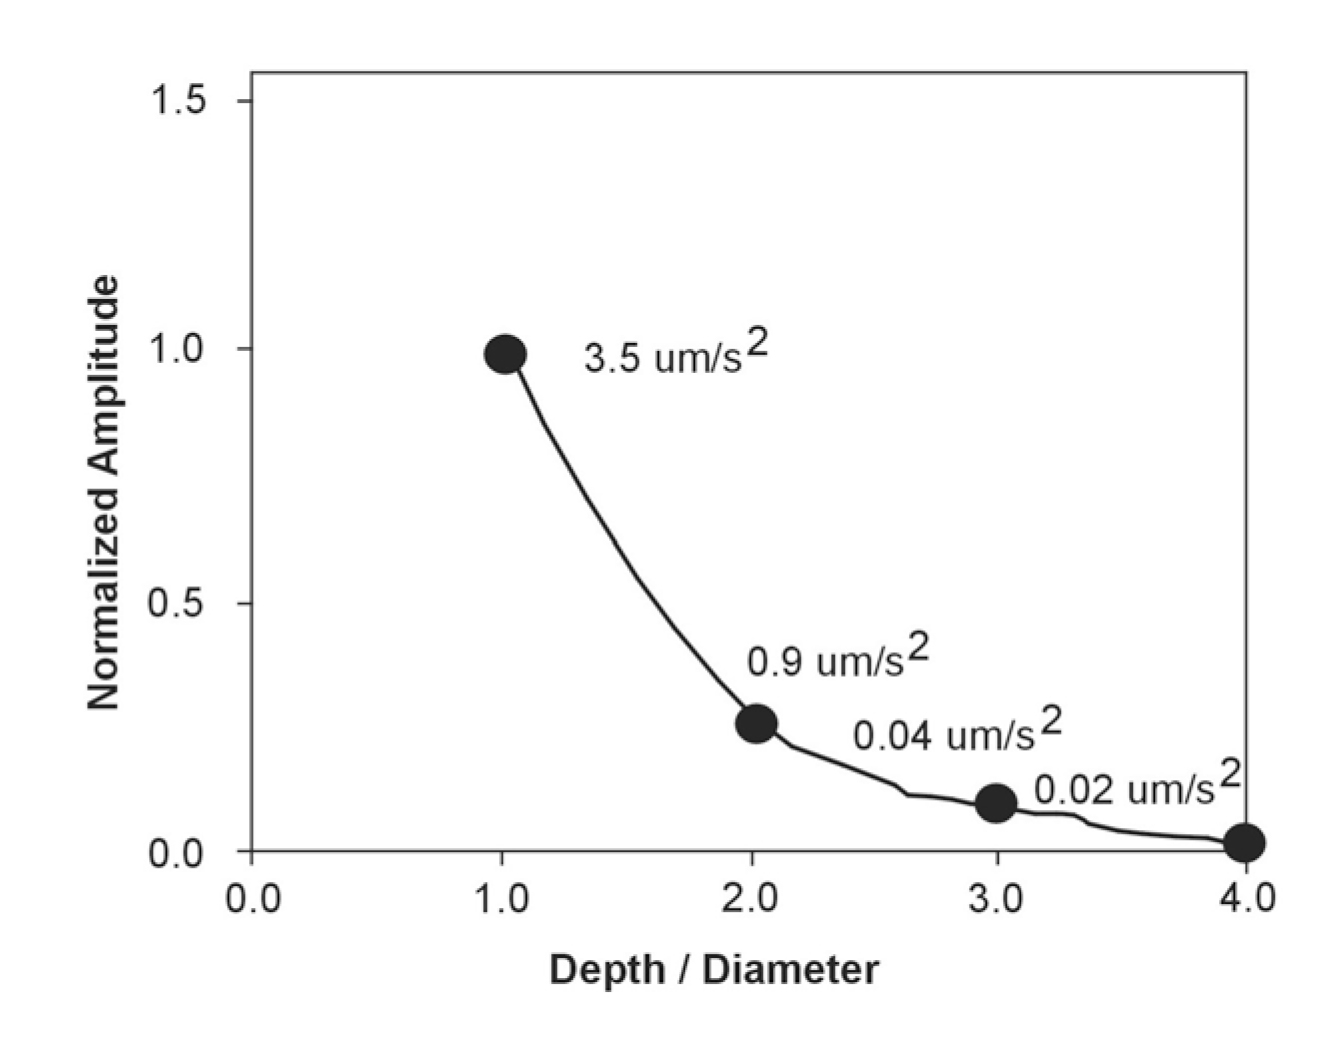 Normalized peak vertical attraction versus depth to diameter for a spherical body.  Values are for a 10-m sphere with a 1.0 g/cc density contrast.